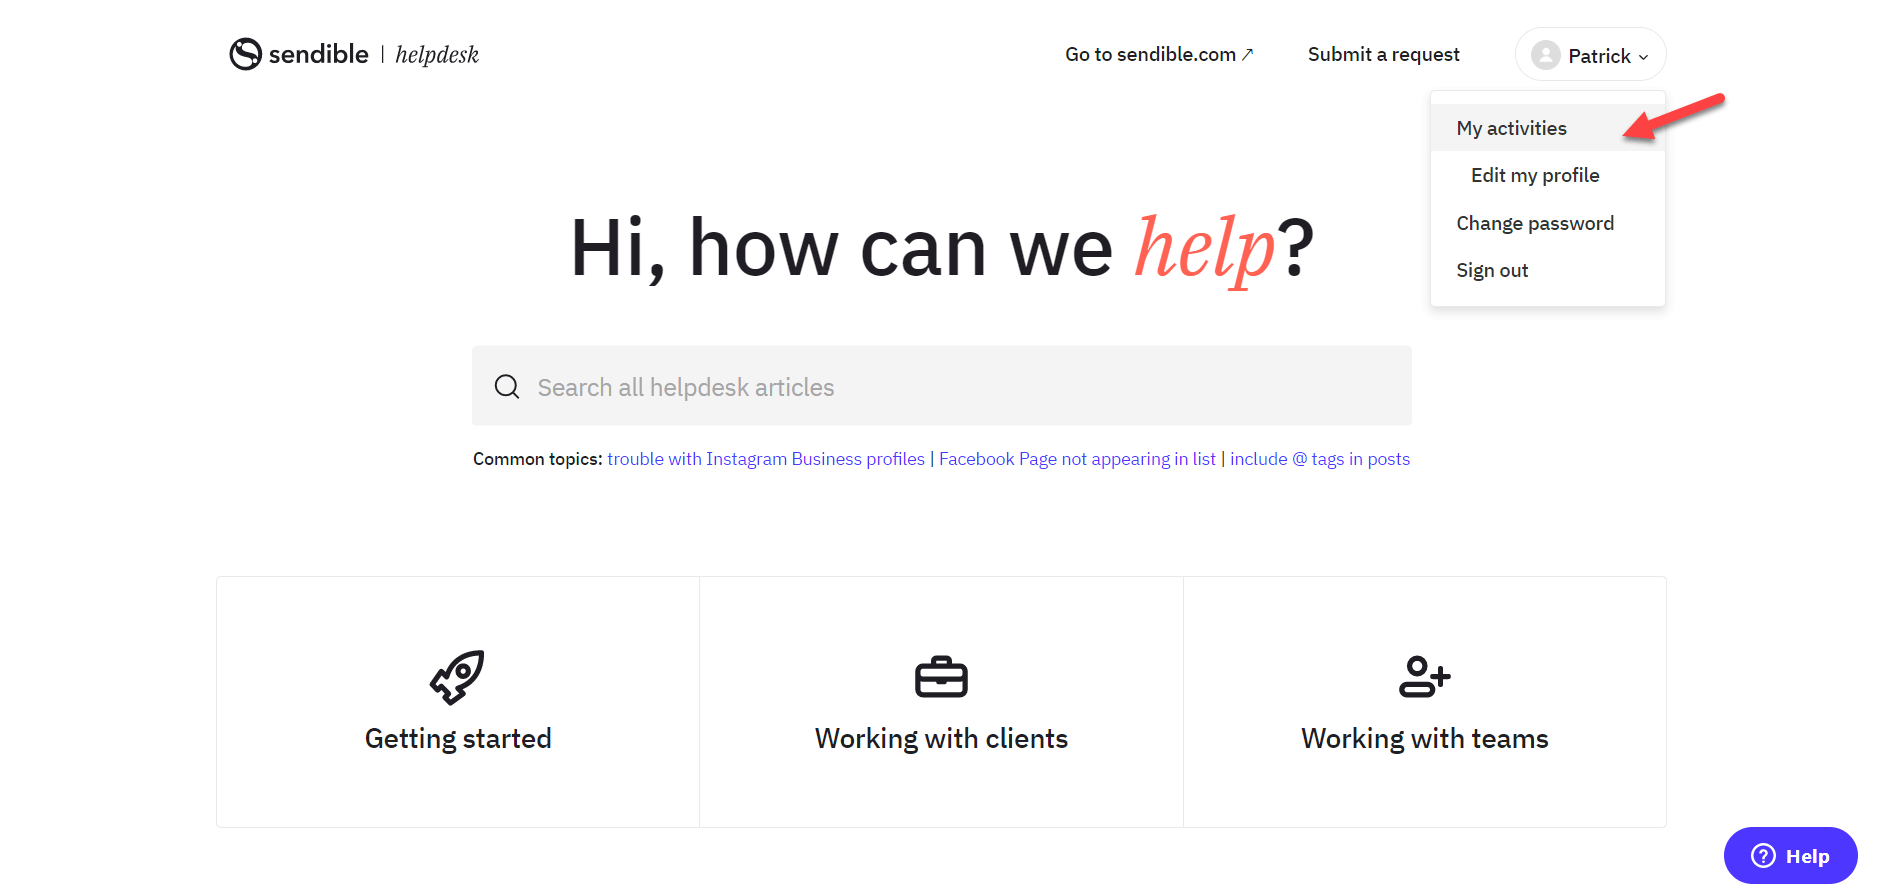 The my activities option is pointed out on the helpdesk